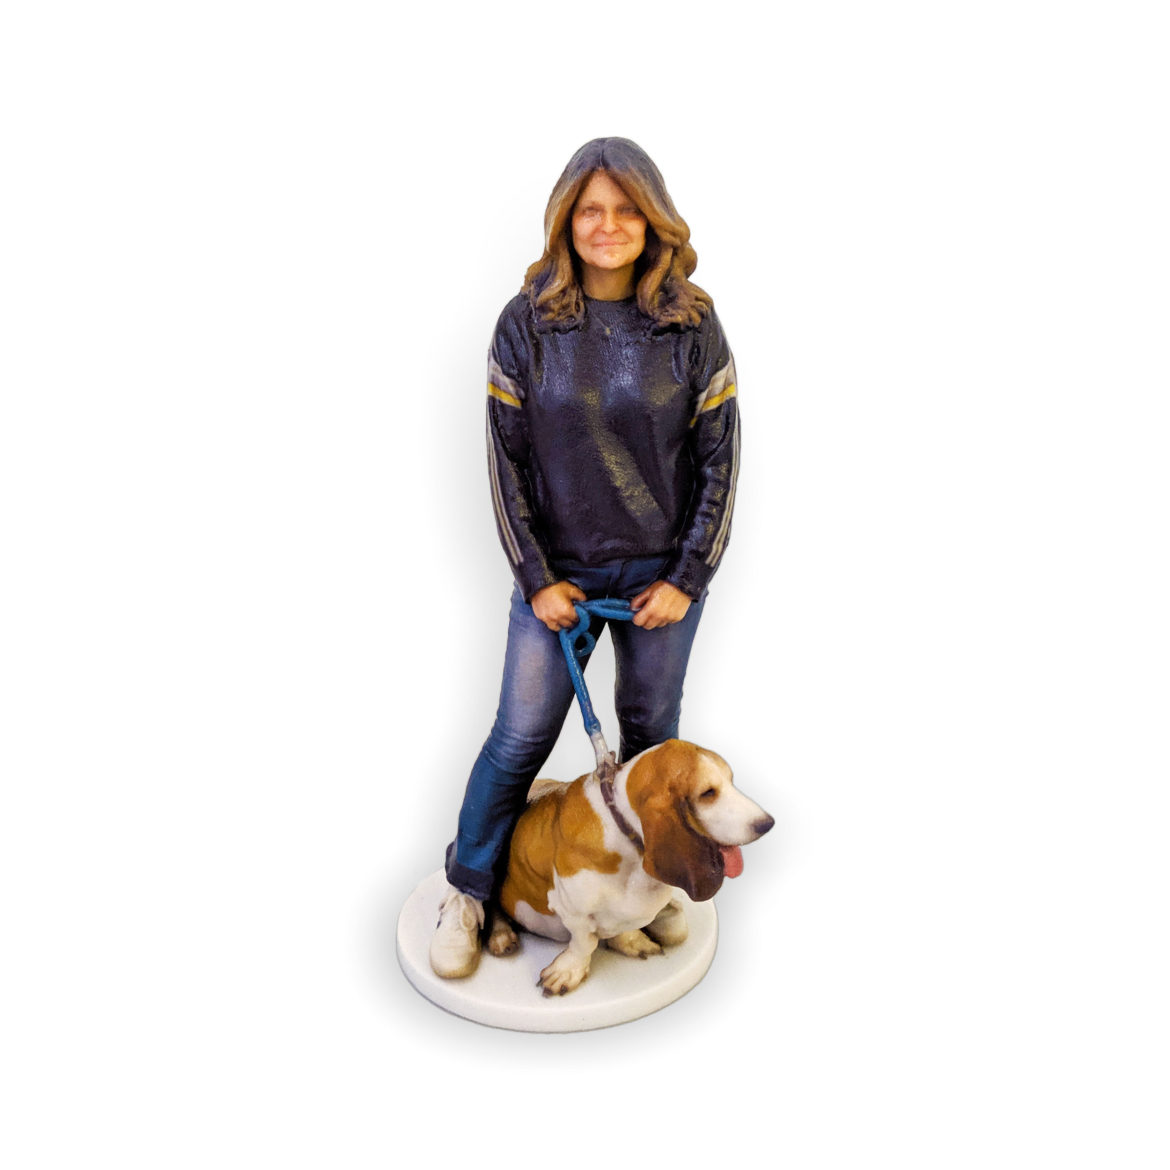 my3Dtwin, Figurine of a women with a dog on a blue leash